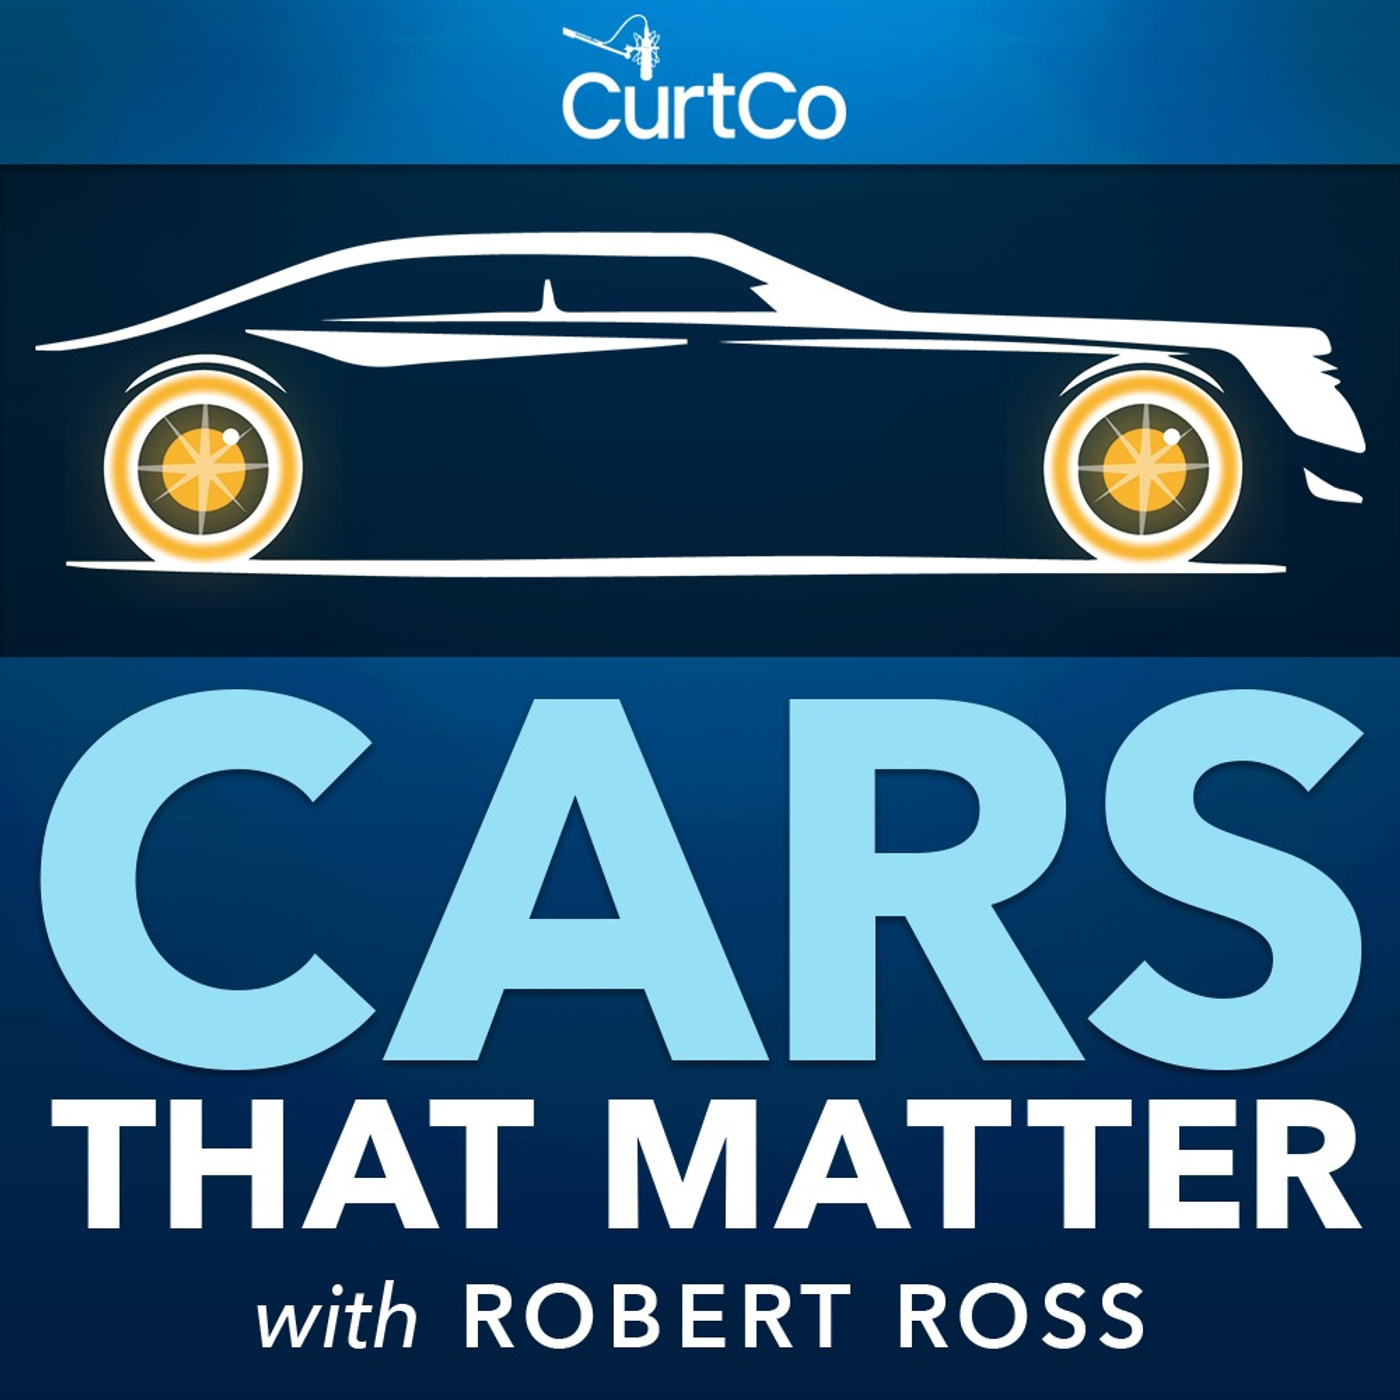 04 - Car Design with Ian Cameron and Verena Kloos Part 2 - History and Future